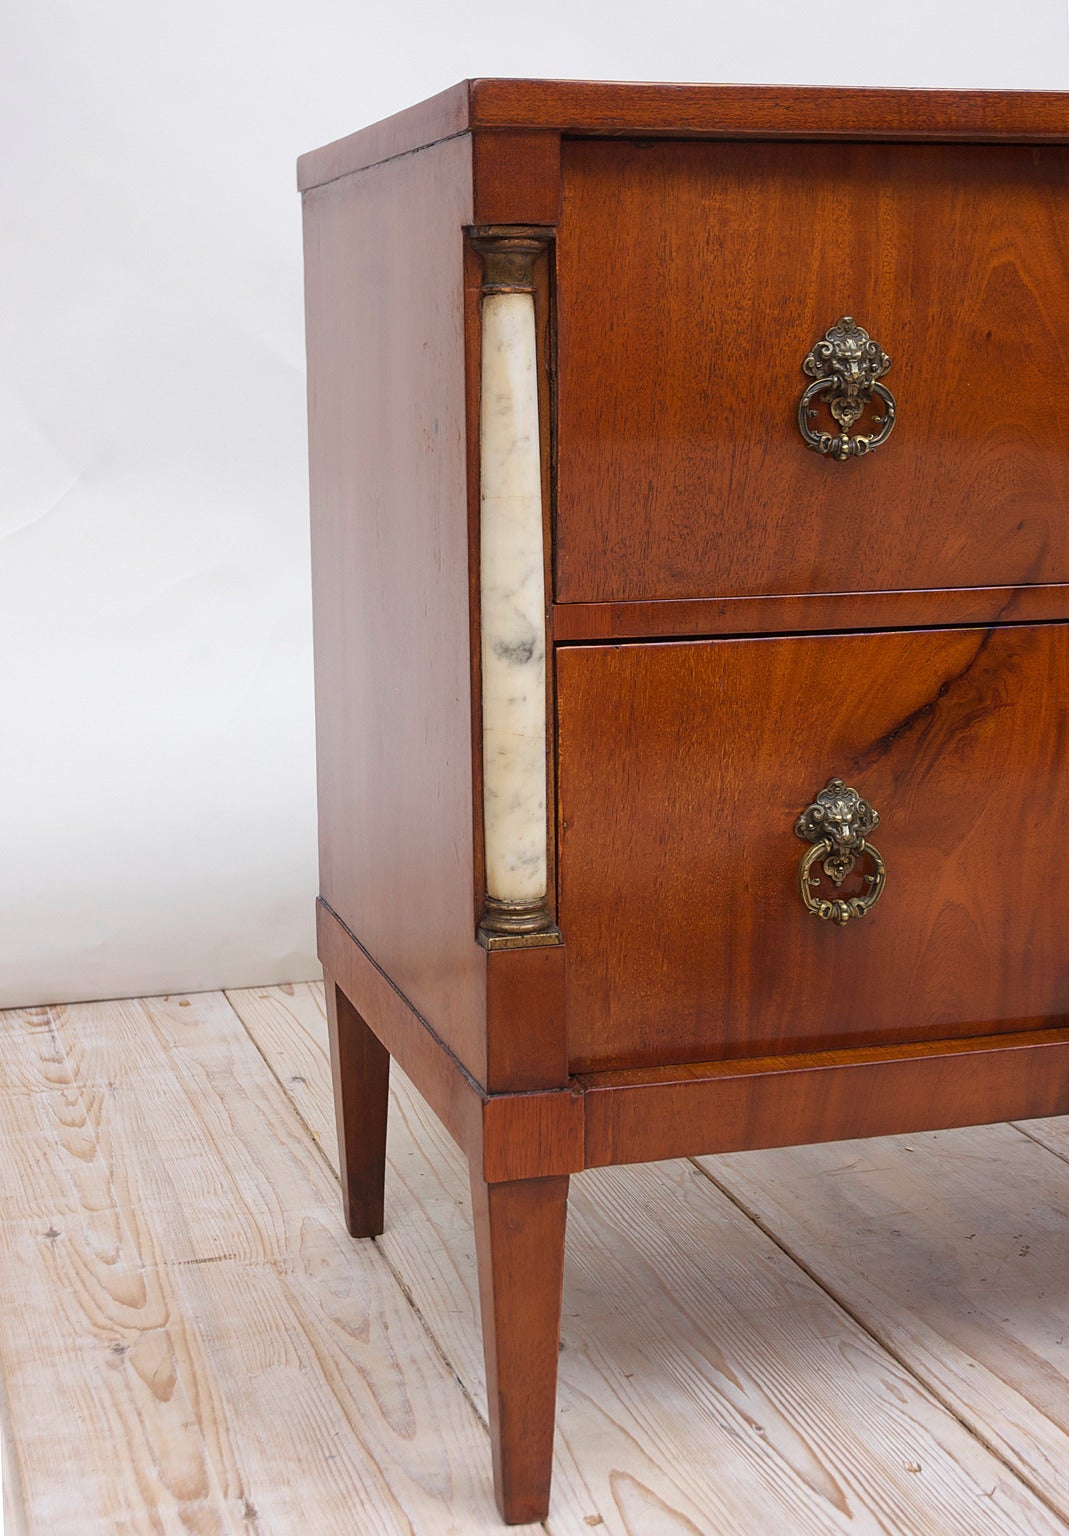 Swedish Small Empire Chest of Drawers in Mahogany with Marble Columns, Sweden, c. 1790 For Sale